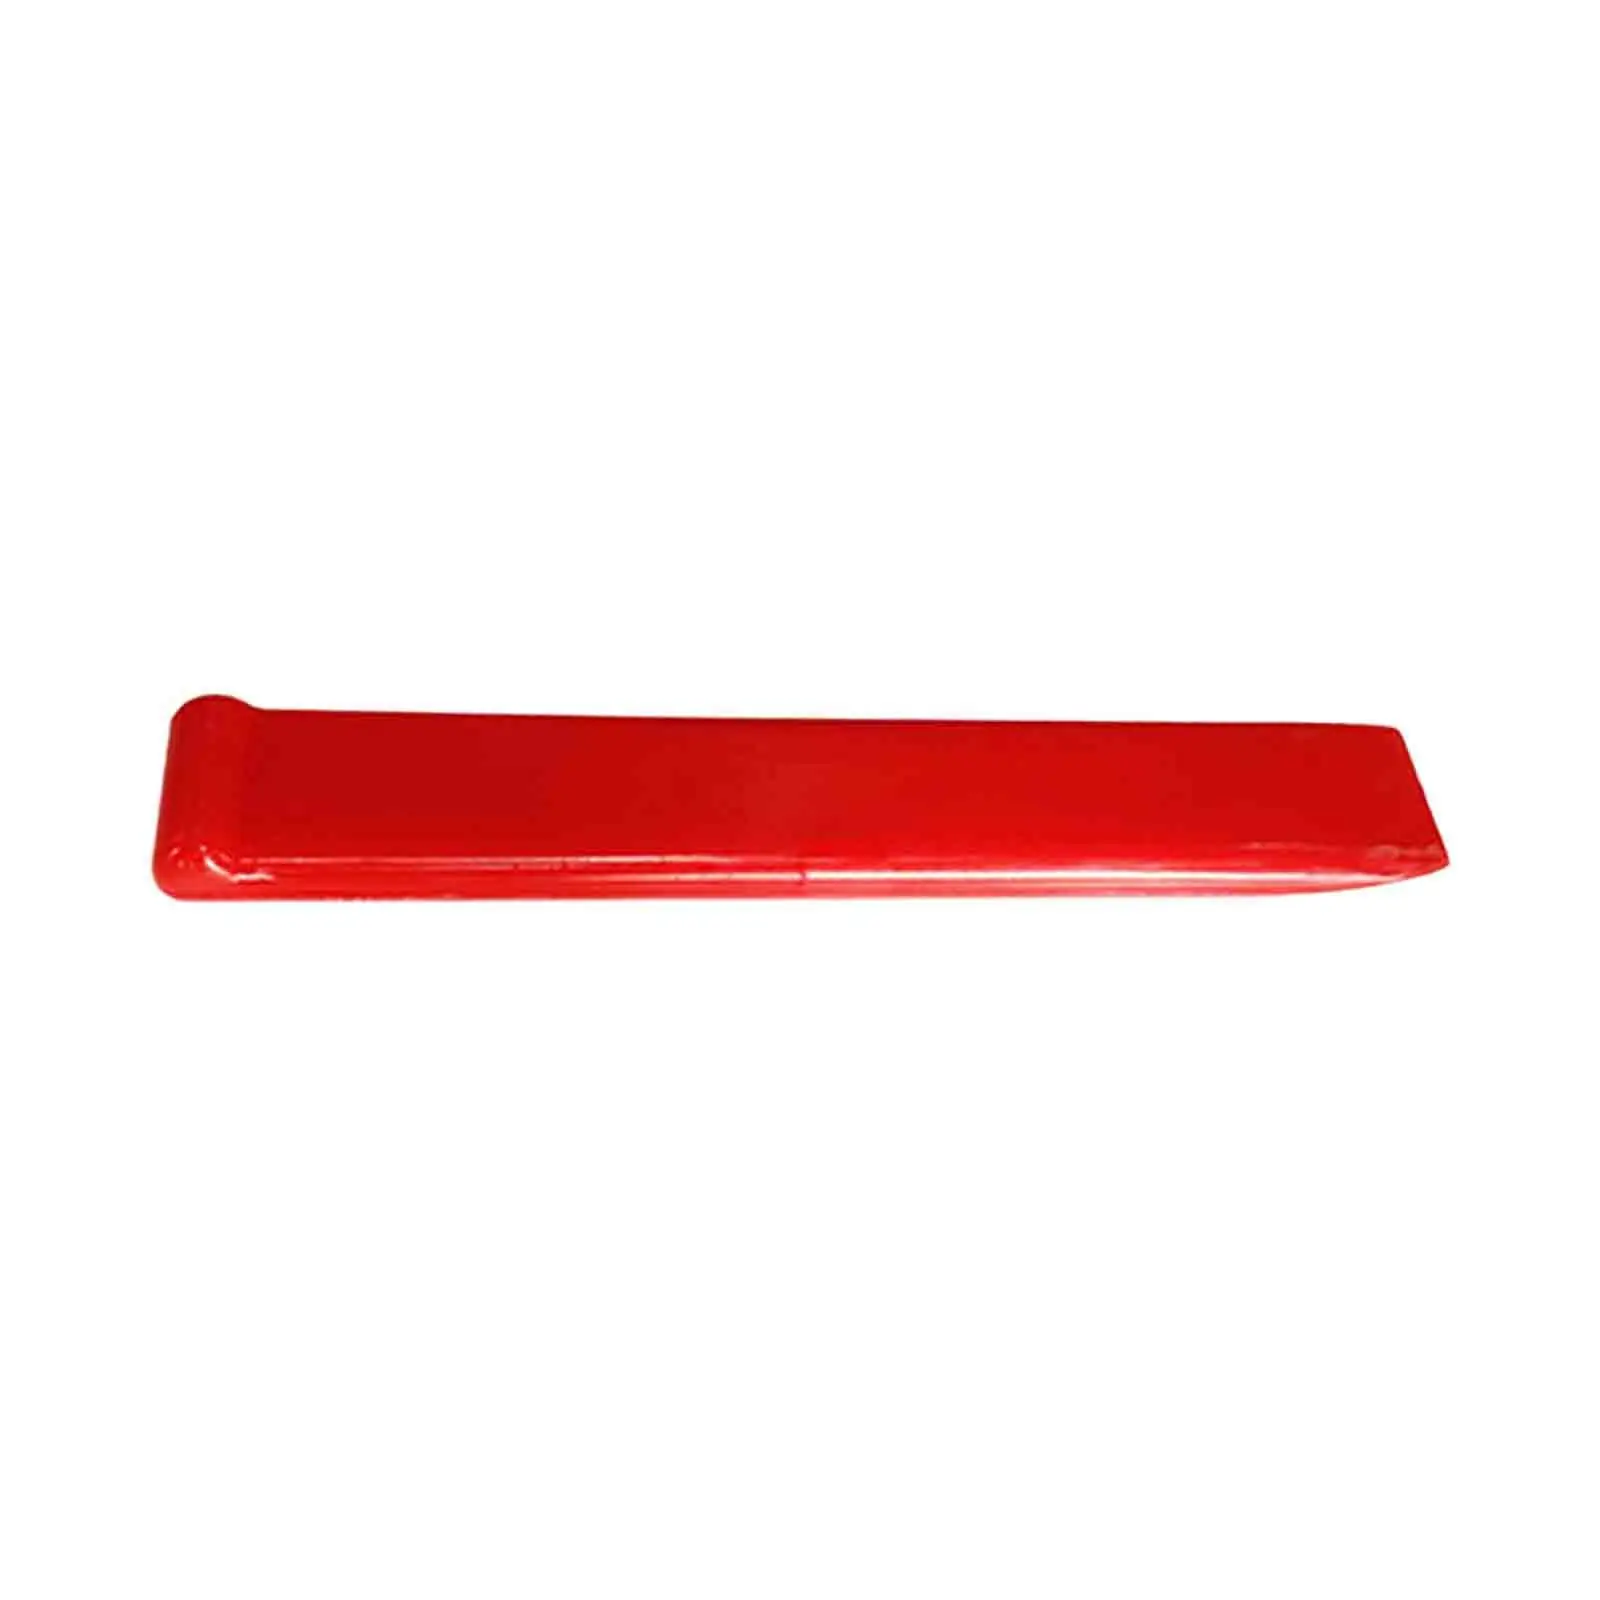 

Auto Dent Repair Tool Durable Beef Tendon Pad Dent Repair Device Knock-free Paint Soft Pad Multiuse for Automobile Truck